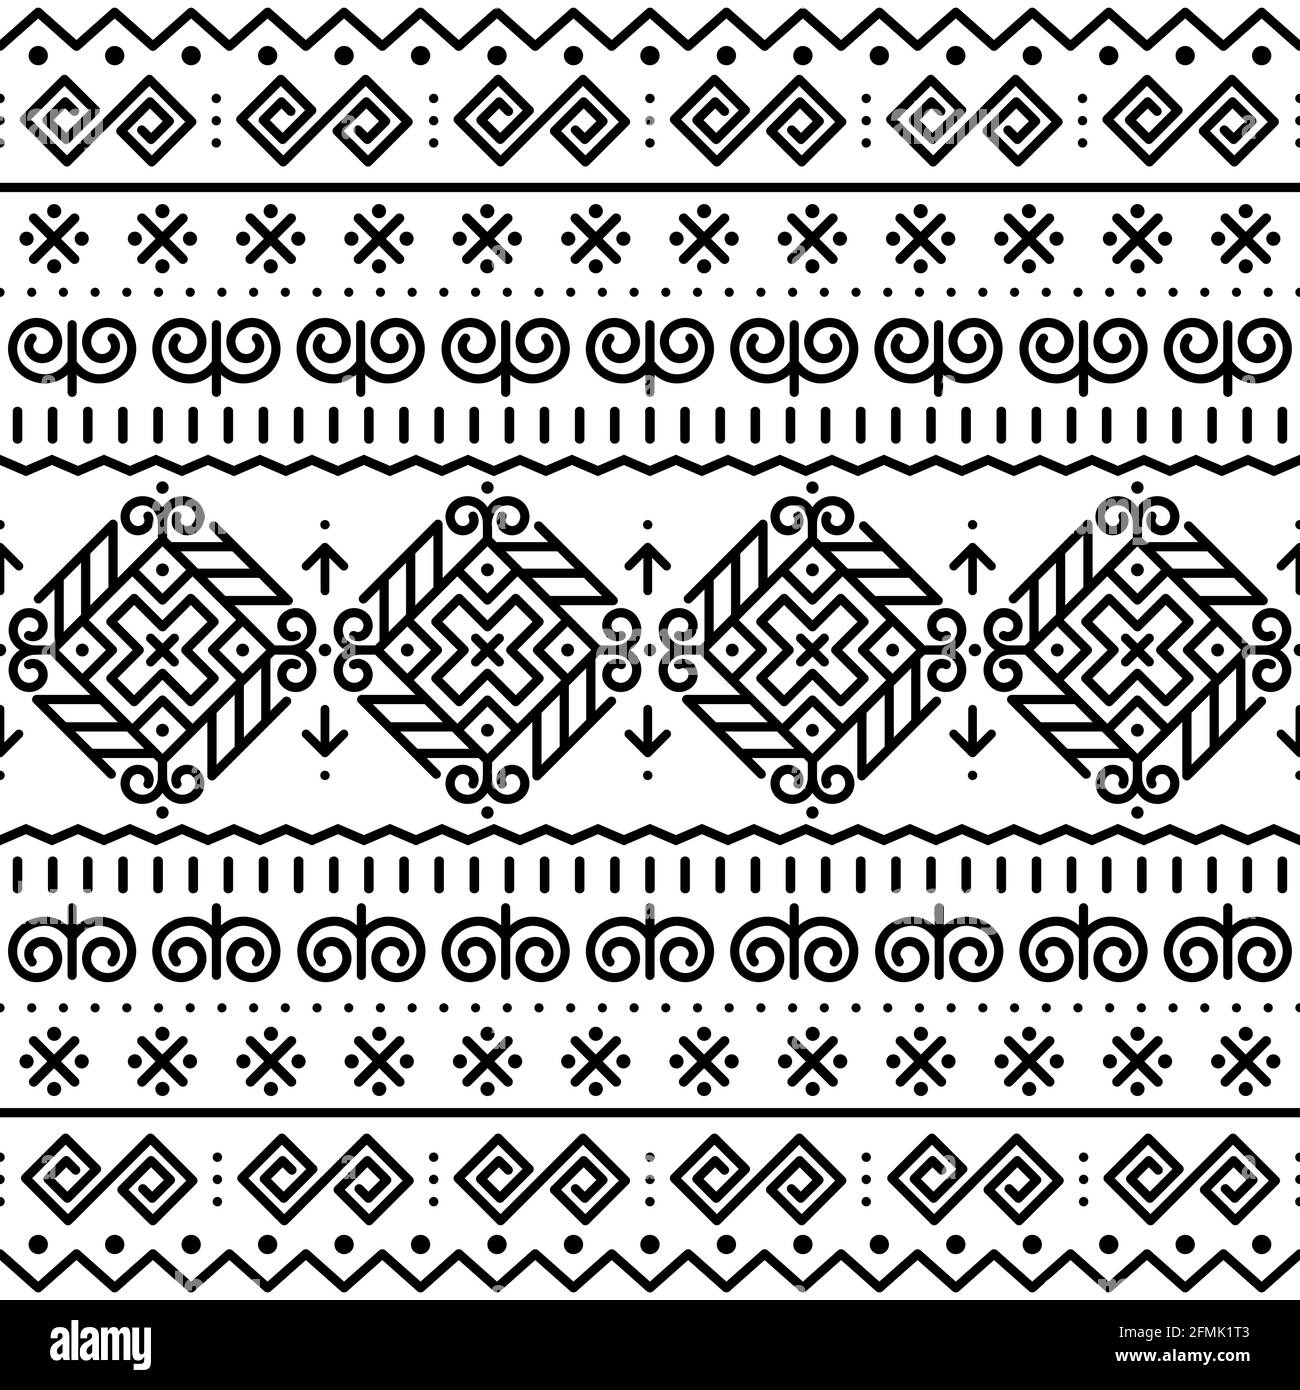 Slovak folk art vector seamless pattern with black ethnic, tribal geometric shapes - inspired by traditional painted art from village Cicmany in Zilin Stock Vector